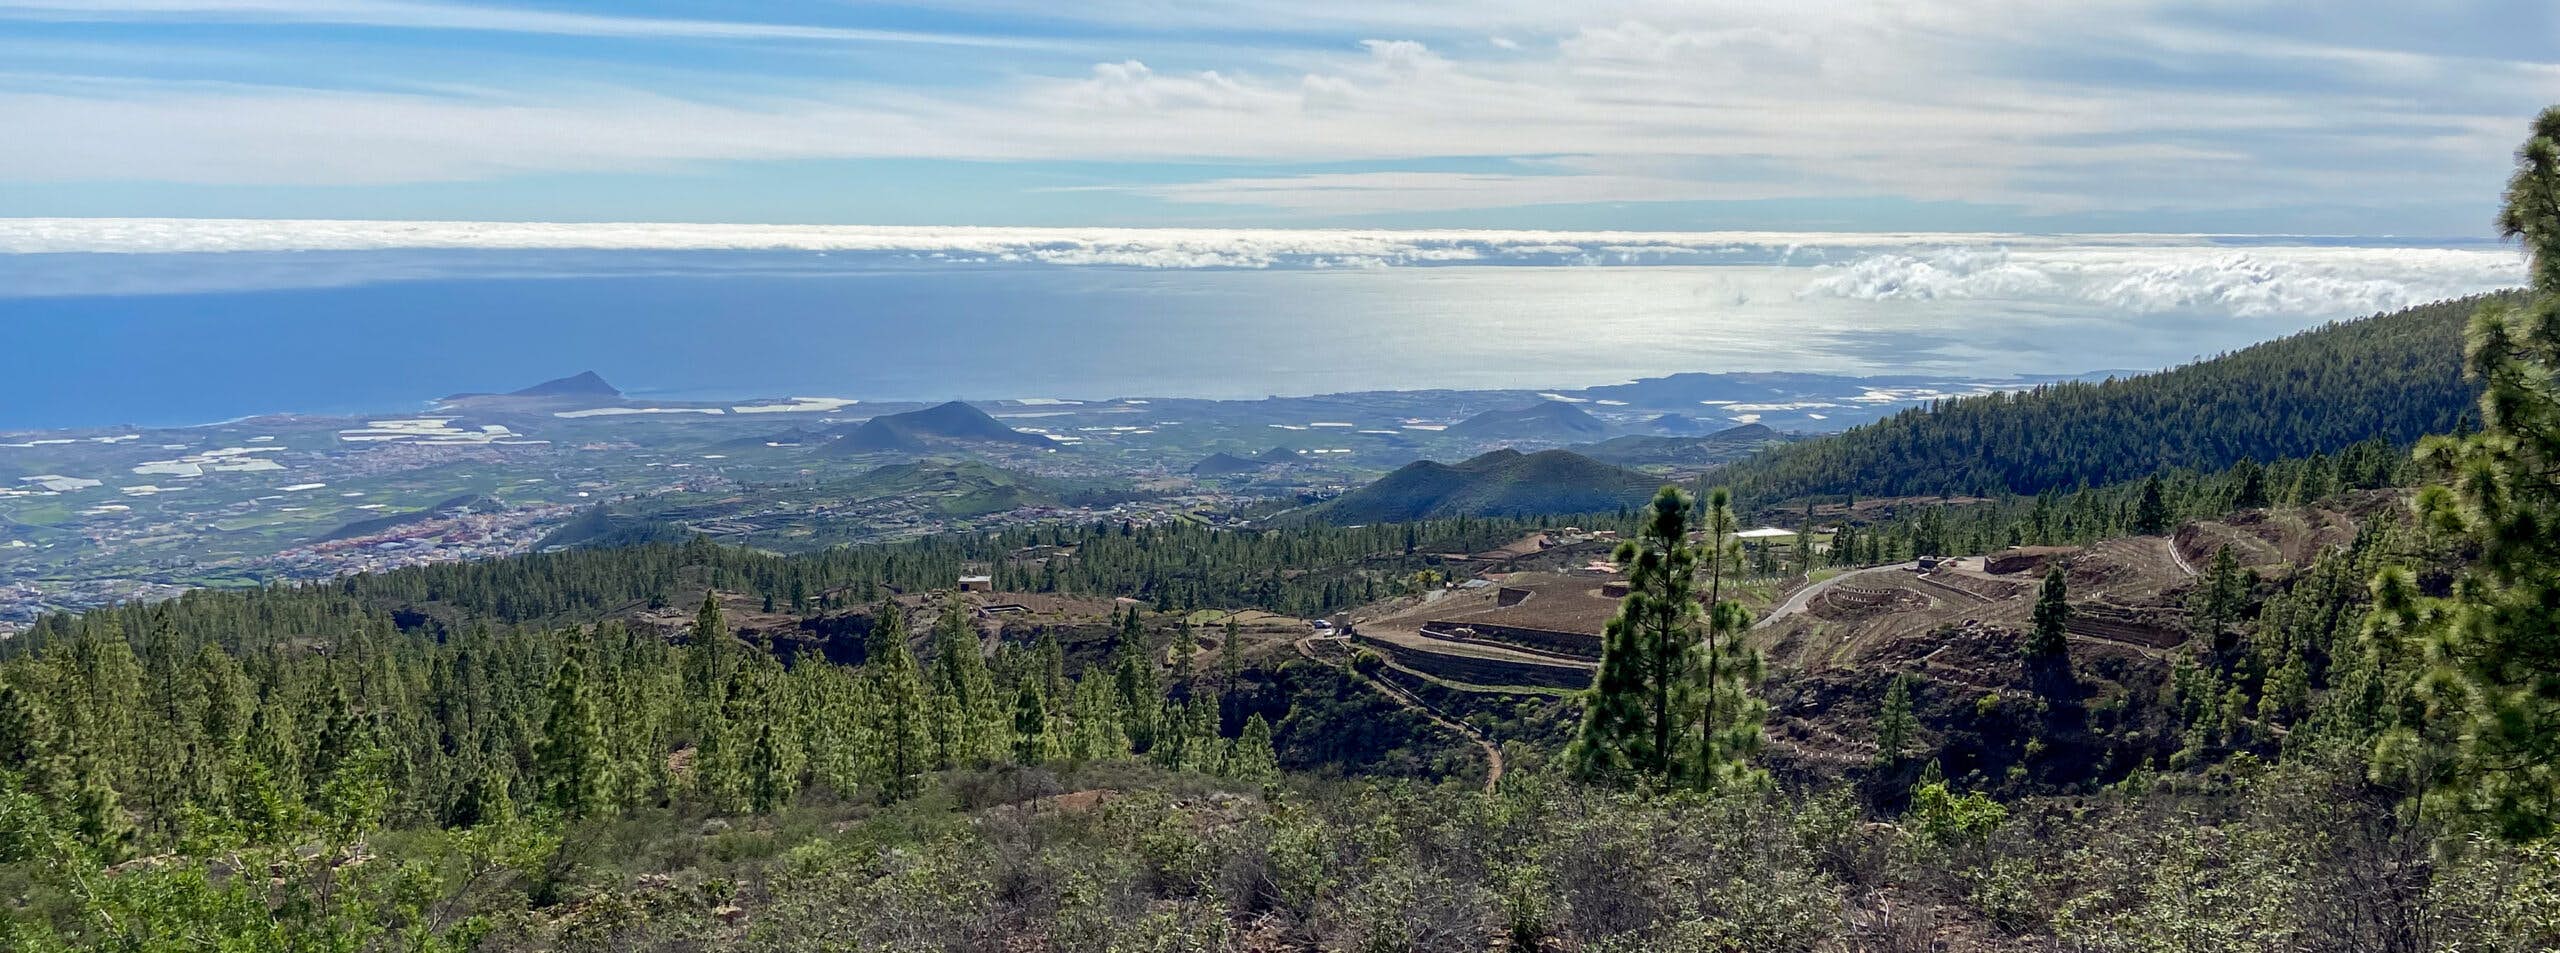 View over terraced fields to the east coast of Tenerife